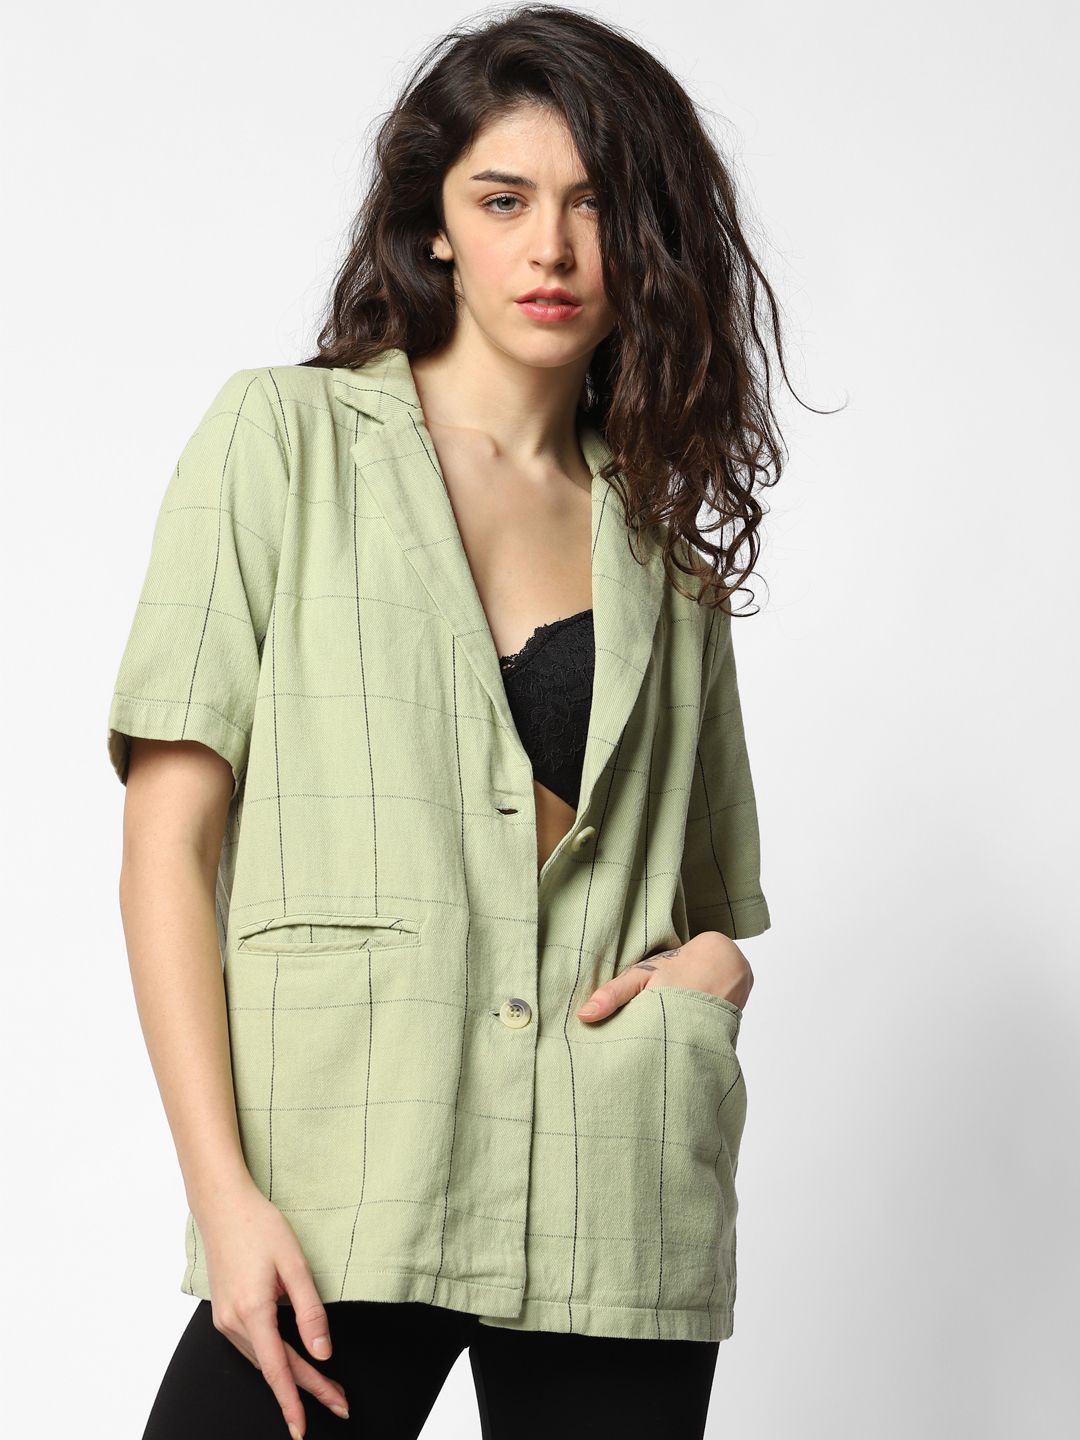 ONLY Women Sea Green & Black Checked Single-Breasted Casual Pure Cotton Blazer Price in India